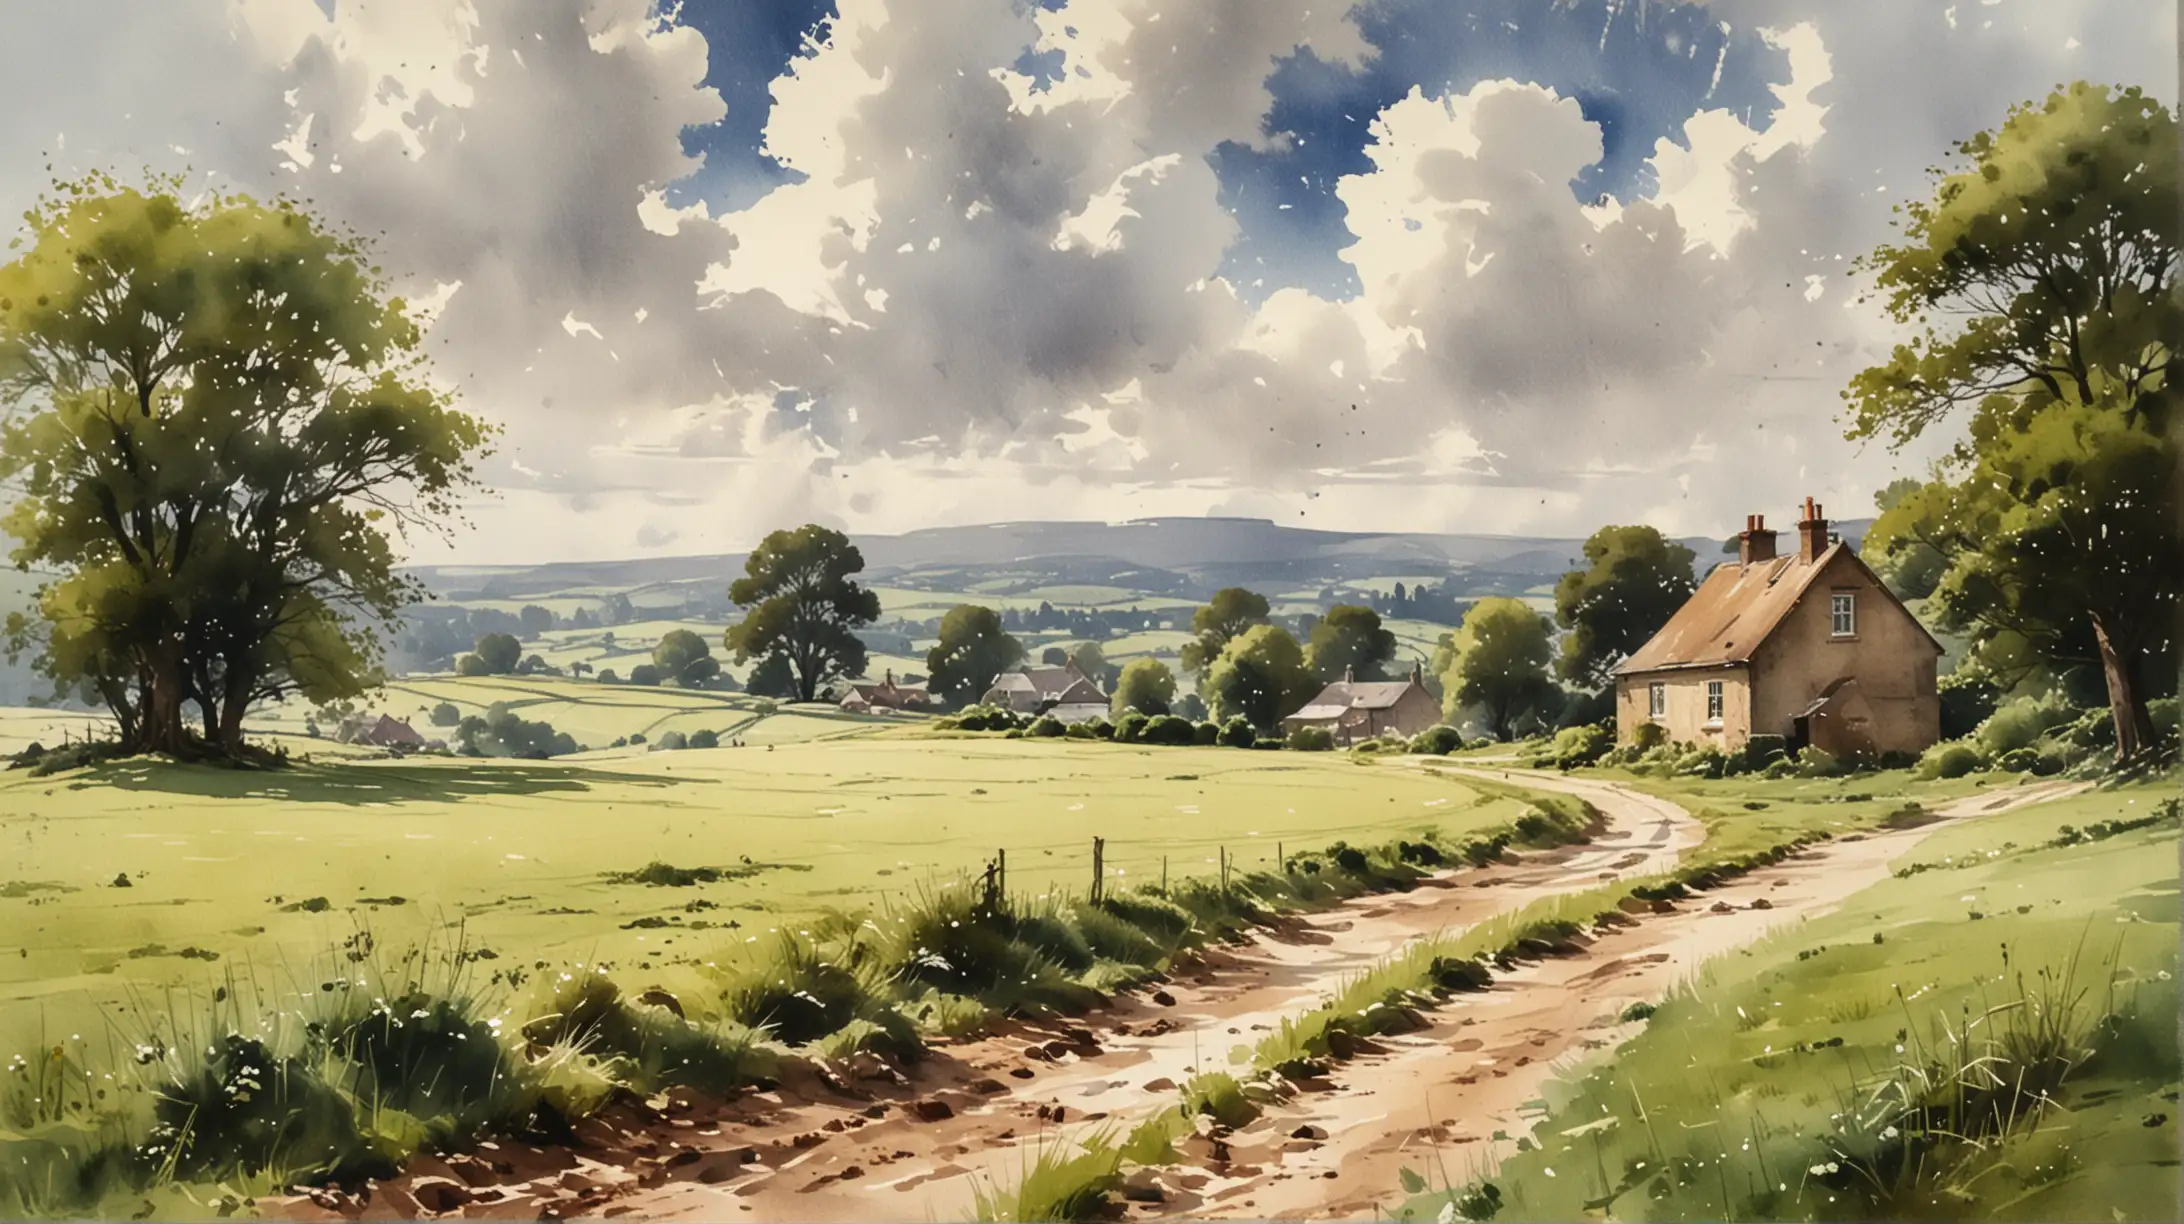 generate an English landscape in watercolor in Edward Seago style. The skies should be half sunny, half cloudy, the surface with grass, a small house in the distance, some trees, and a very small hill in the background